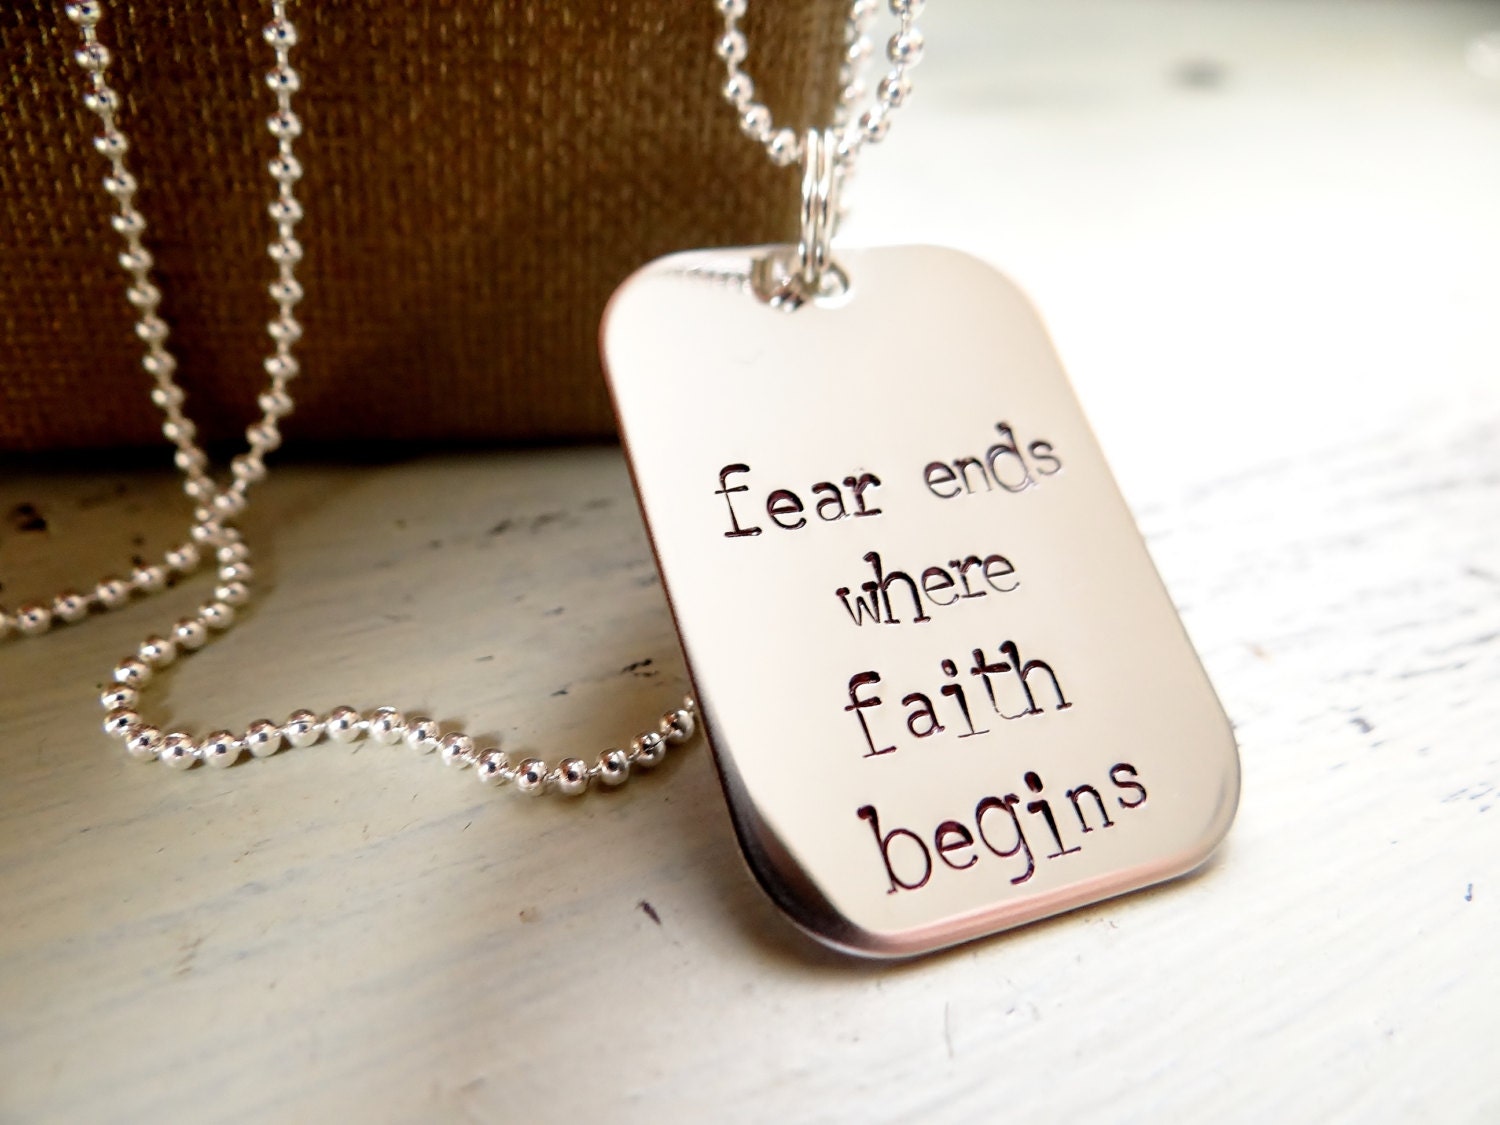 Fear Ends Where Faith Begins Handstamped Silver Necklace.  Simple Inspirational Silver Necklace.  Christian Jewelry. - BBeadazzled